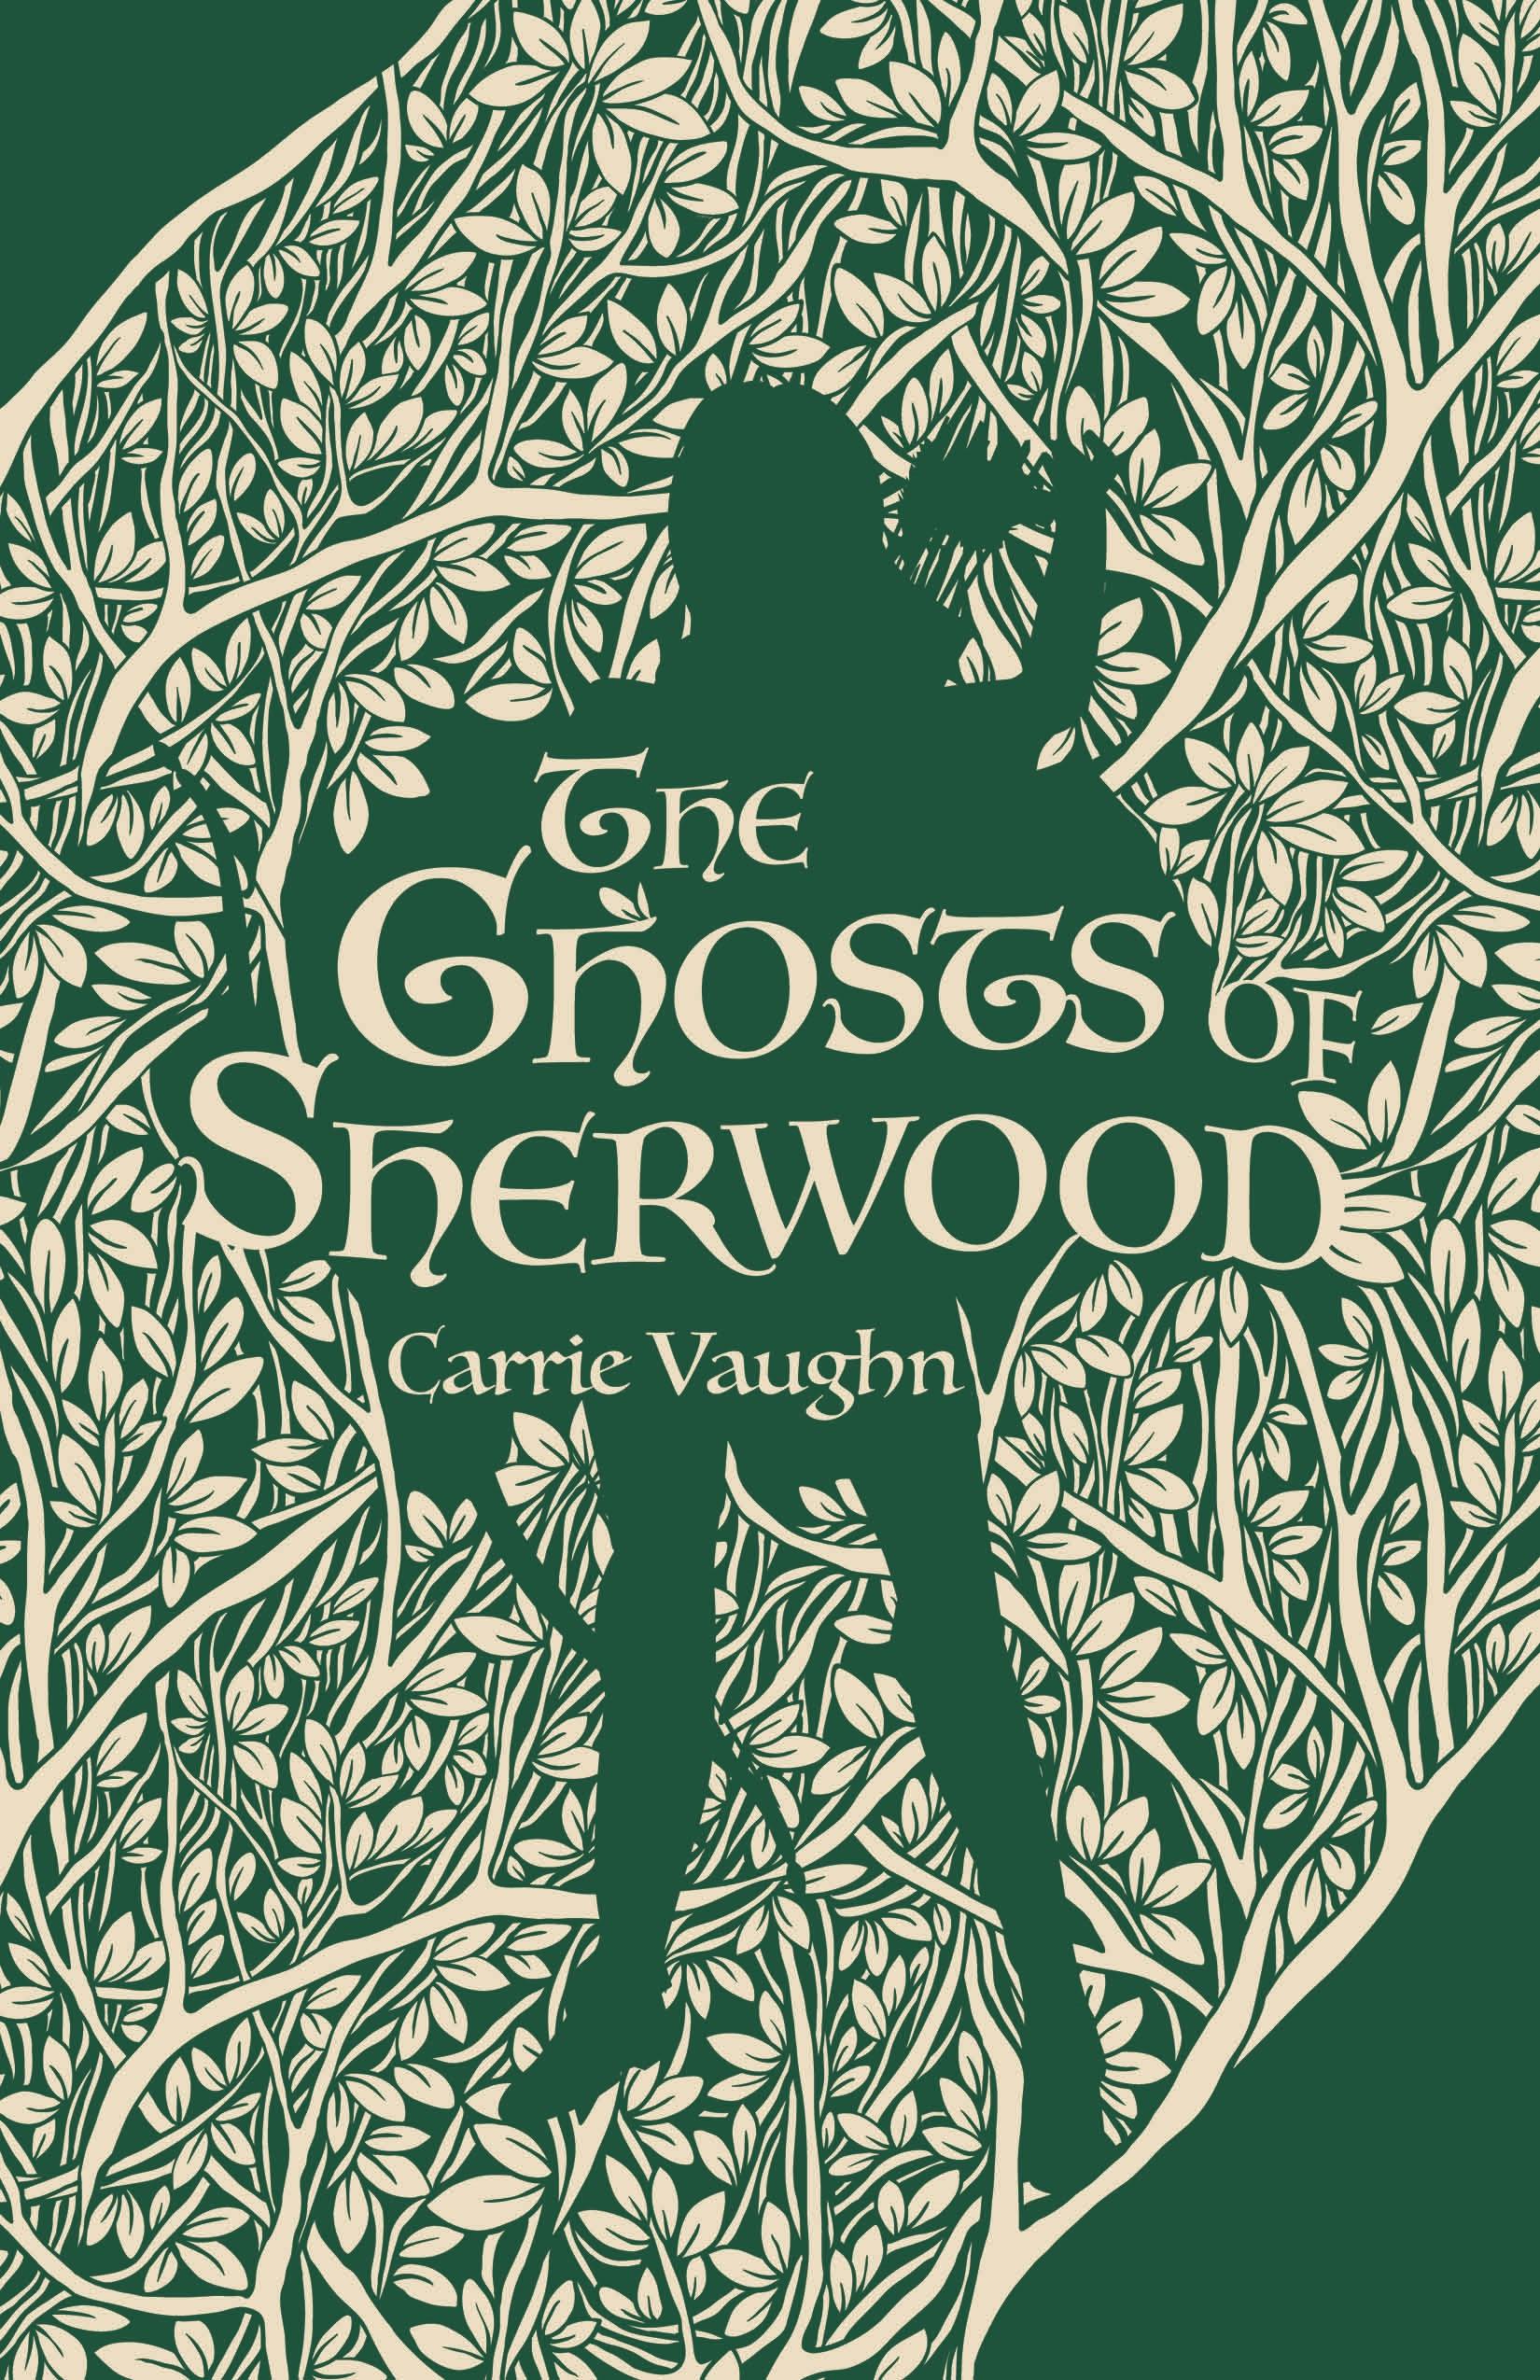 Cover for the book titled as: The Ghosts of Sherwood